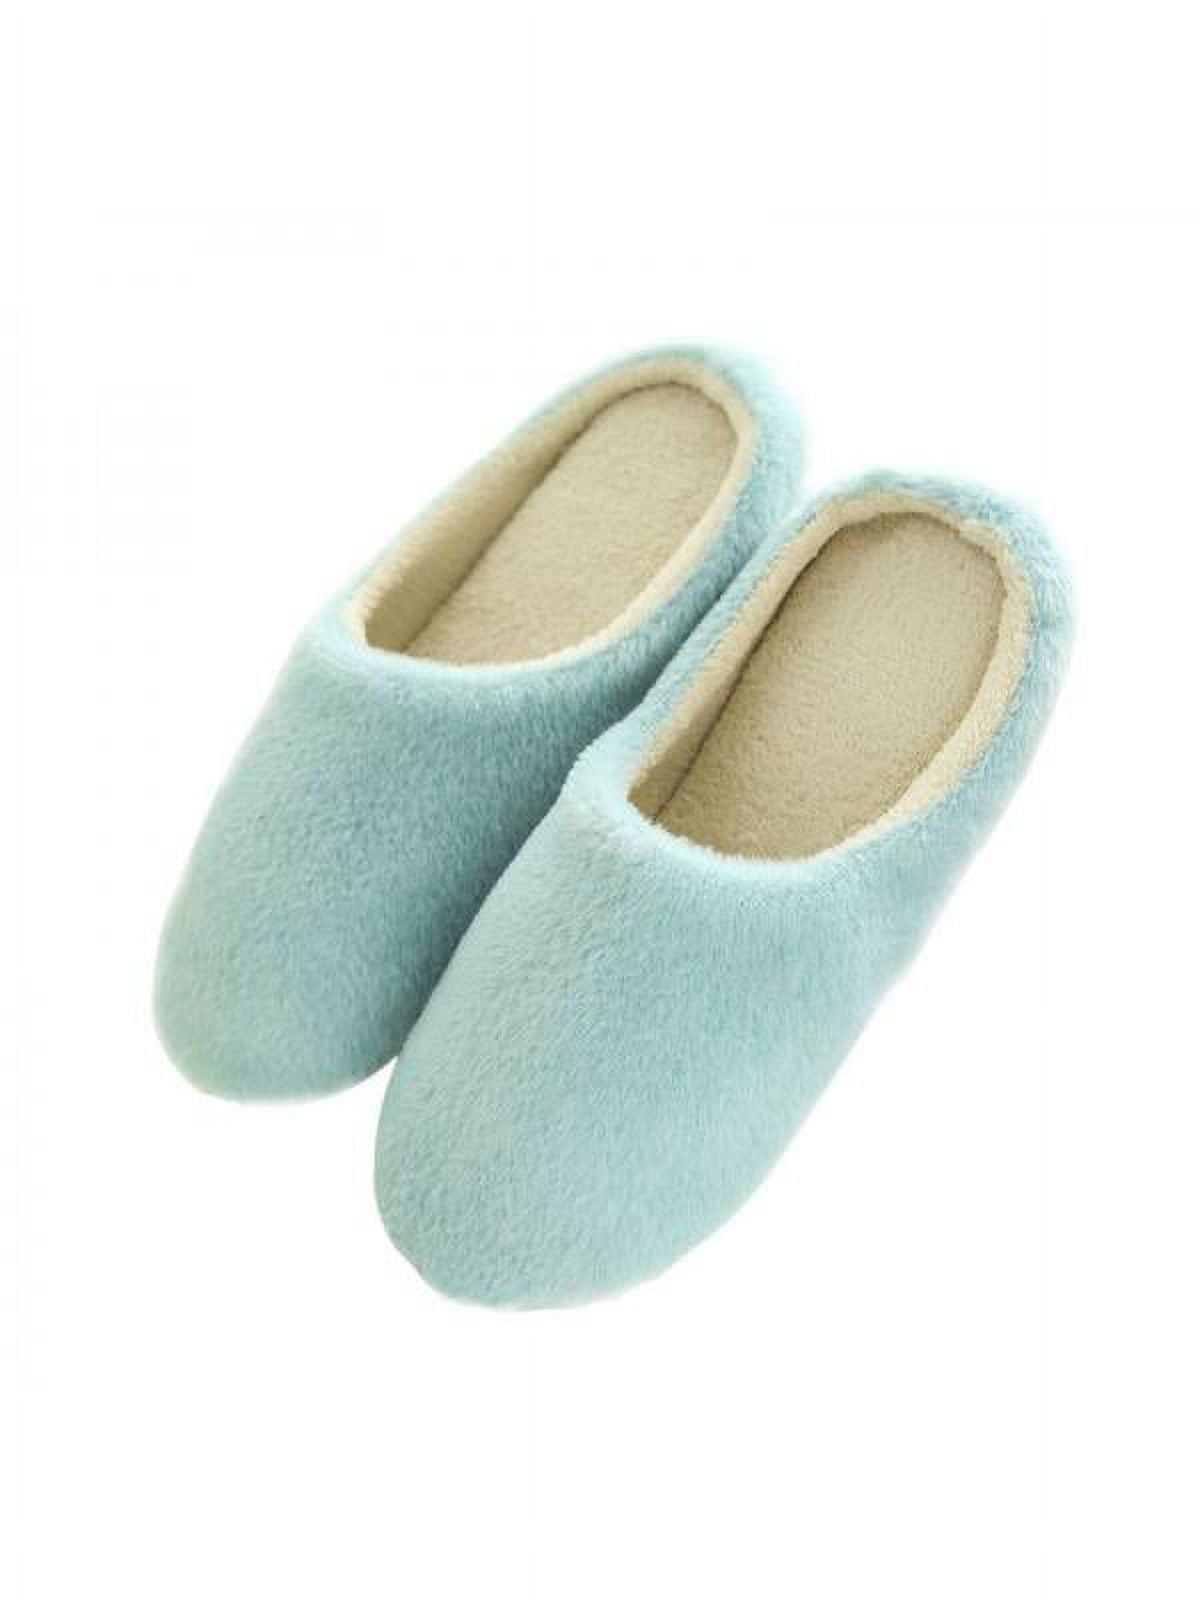 Women Slippers Interior House Plush Soft Cute Cotton Slippers Shoes Non ...